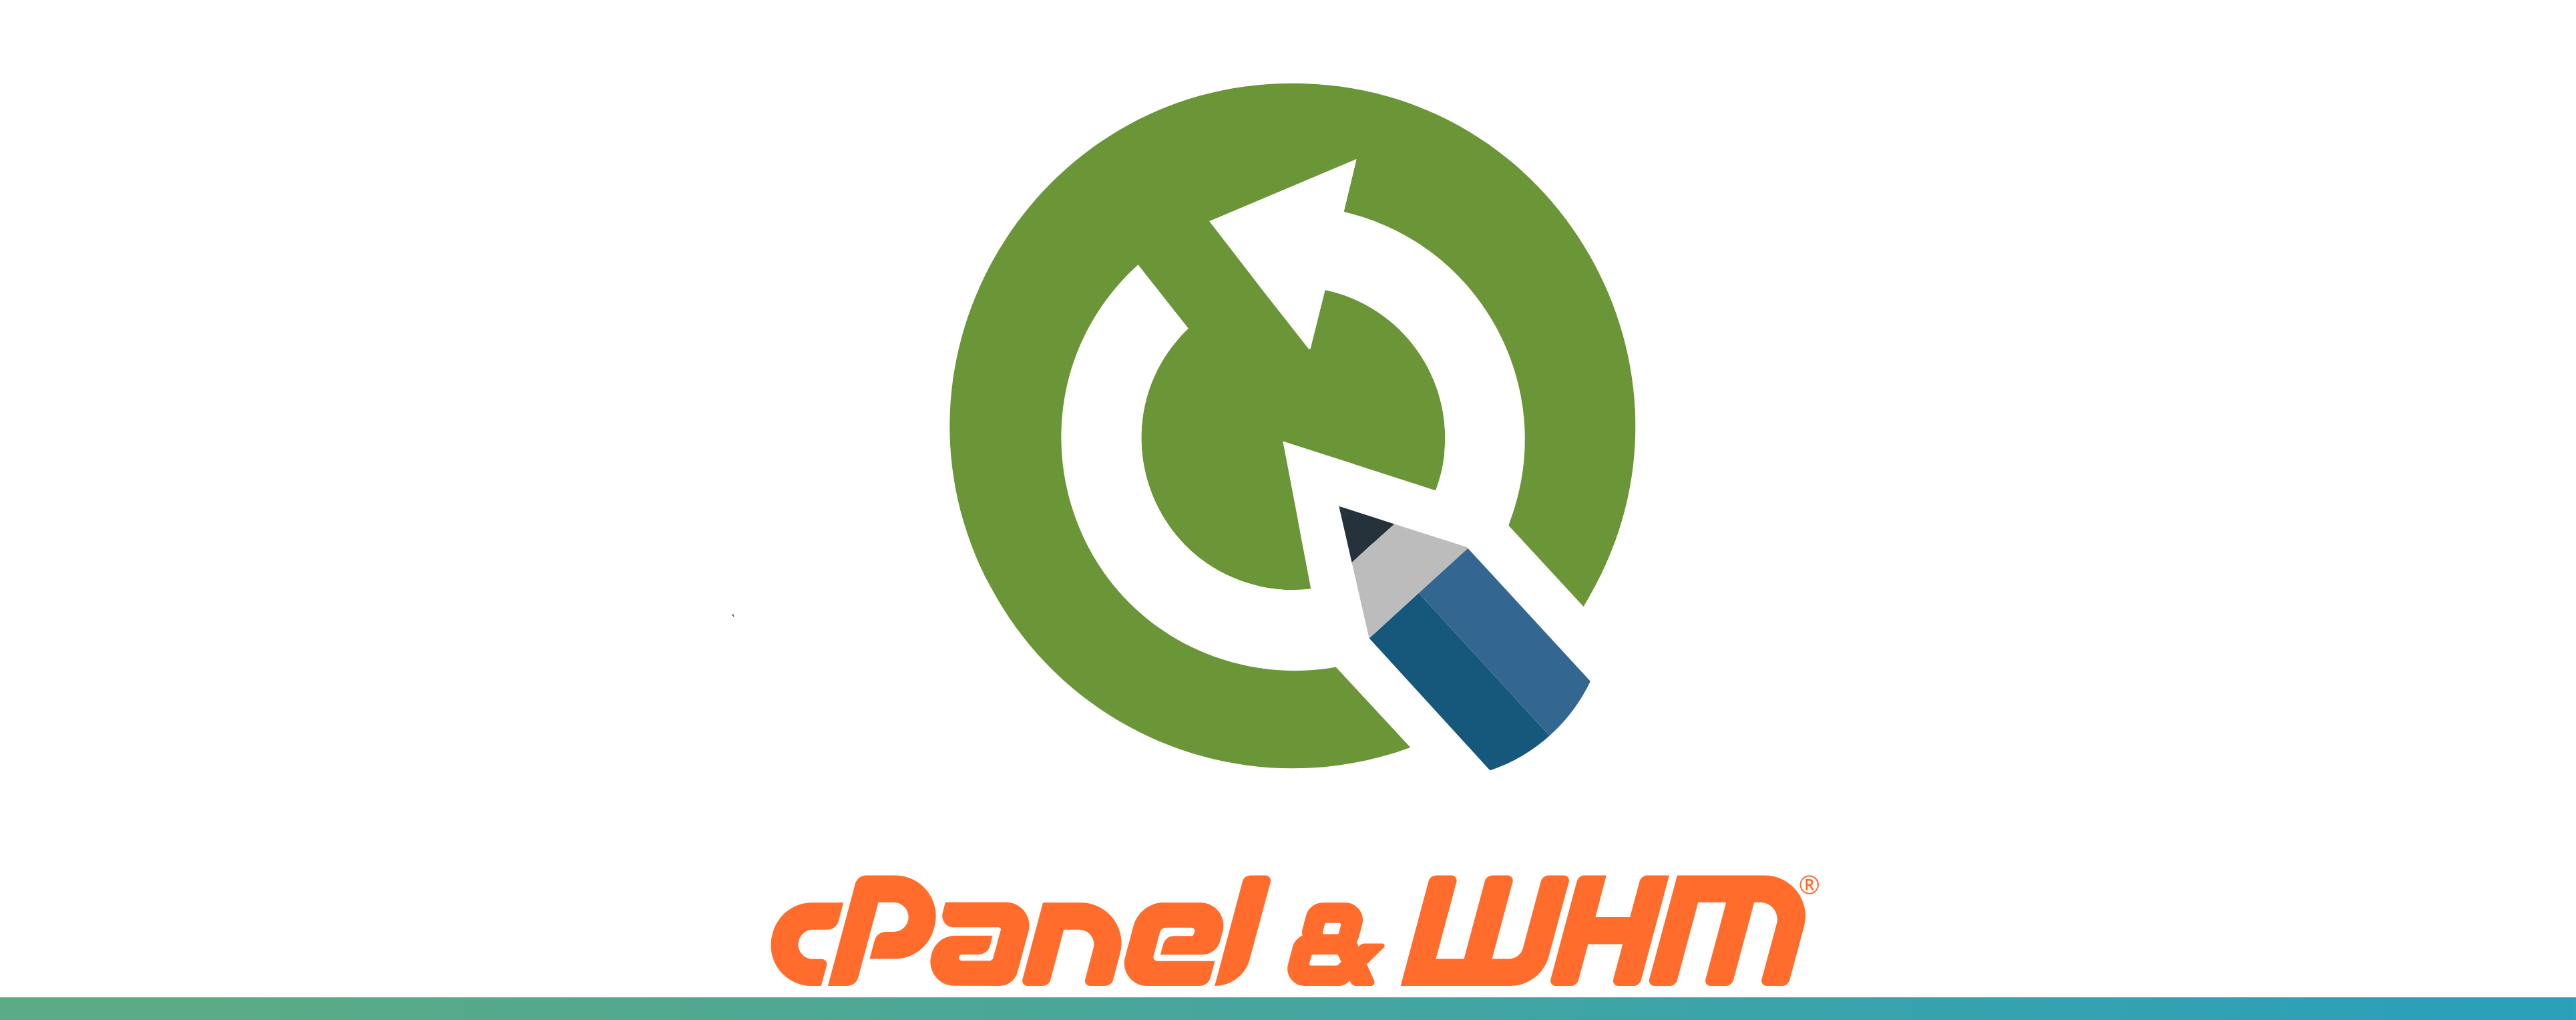 cpanel whm server cleanup